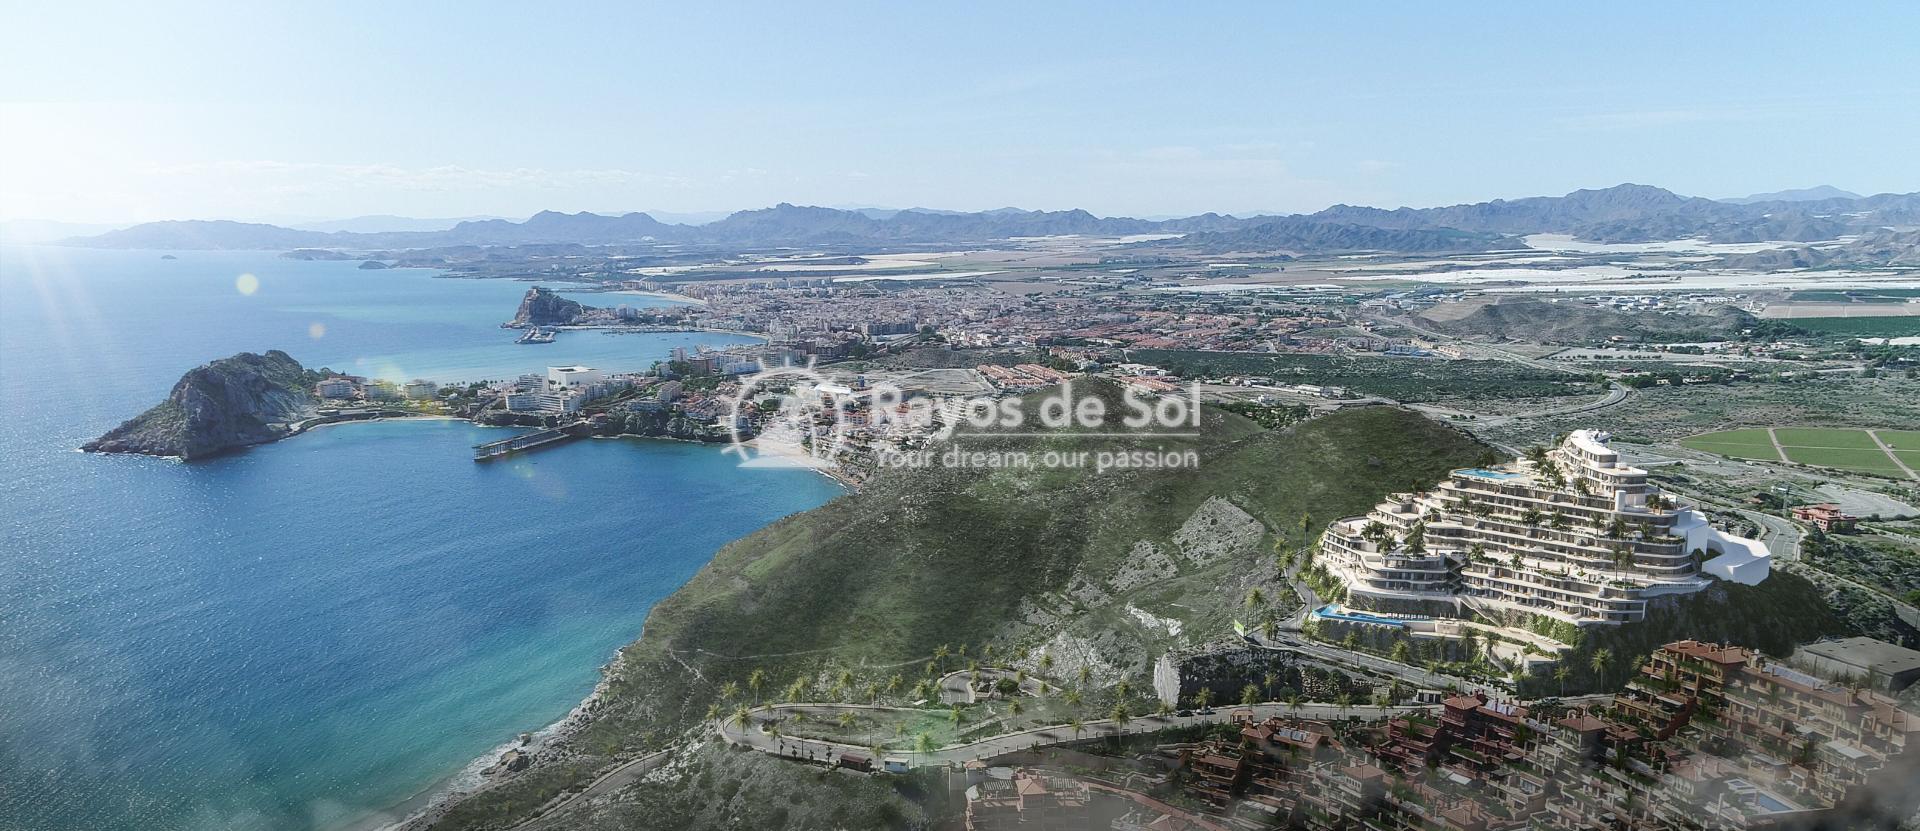 Beautiful ground floor apartment with seaviews  in Aguilas, Costa Cálida (AGQUIC1-1B) - 10